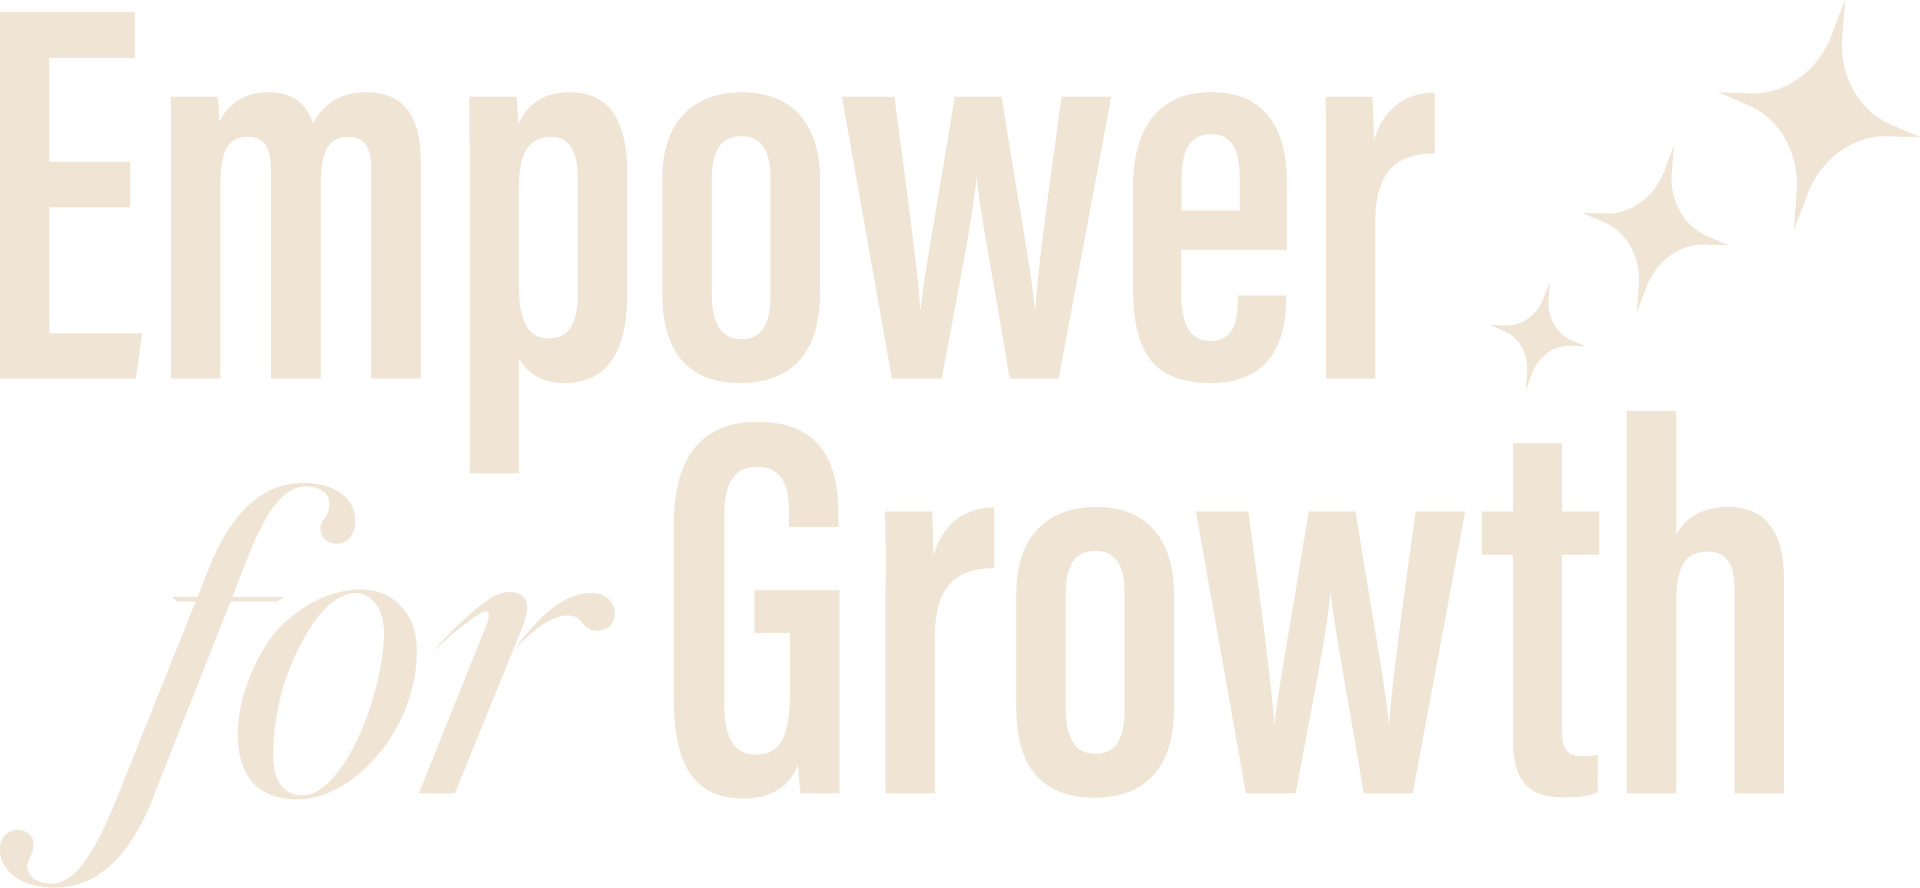 Empower for Growth